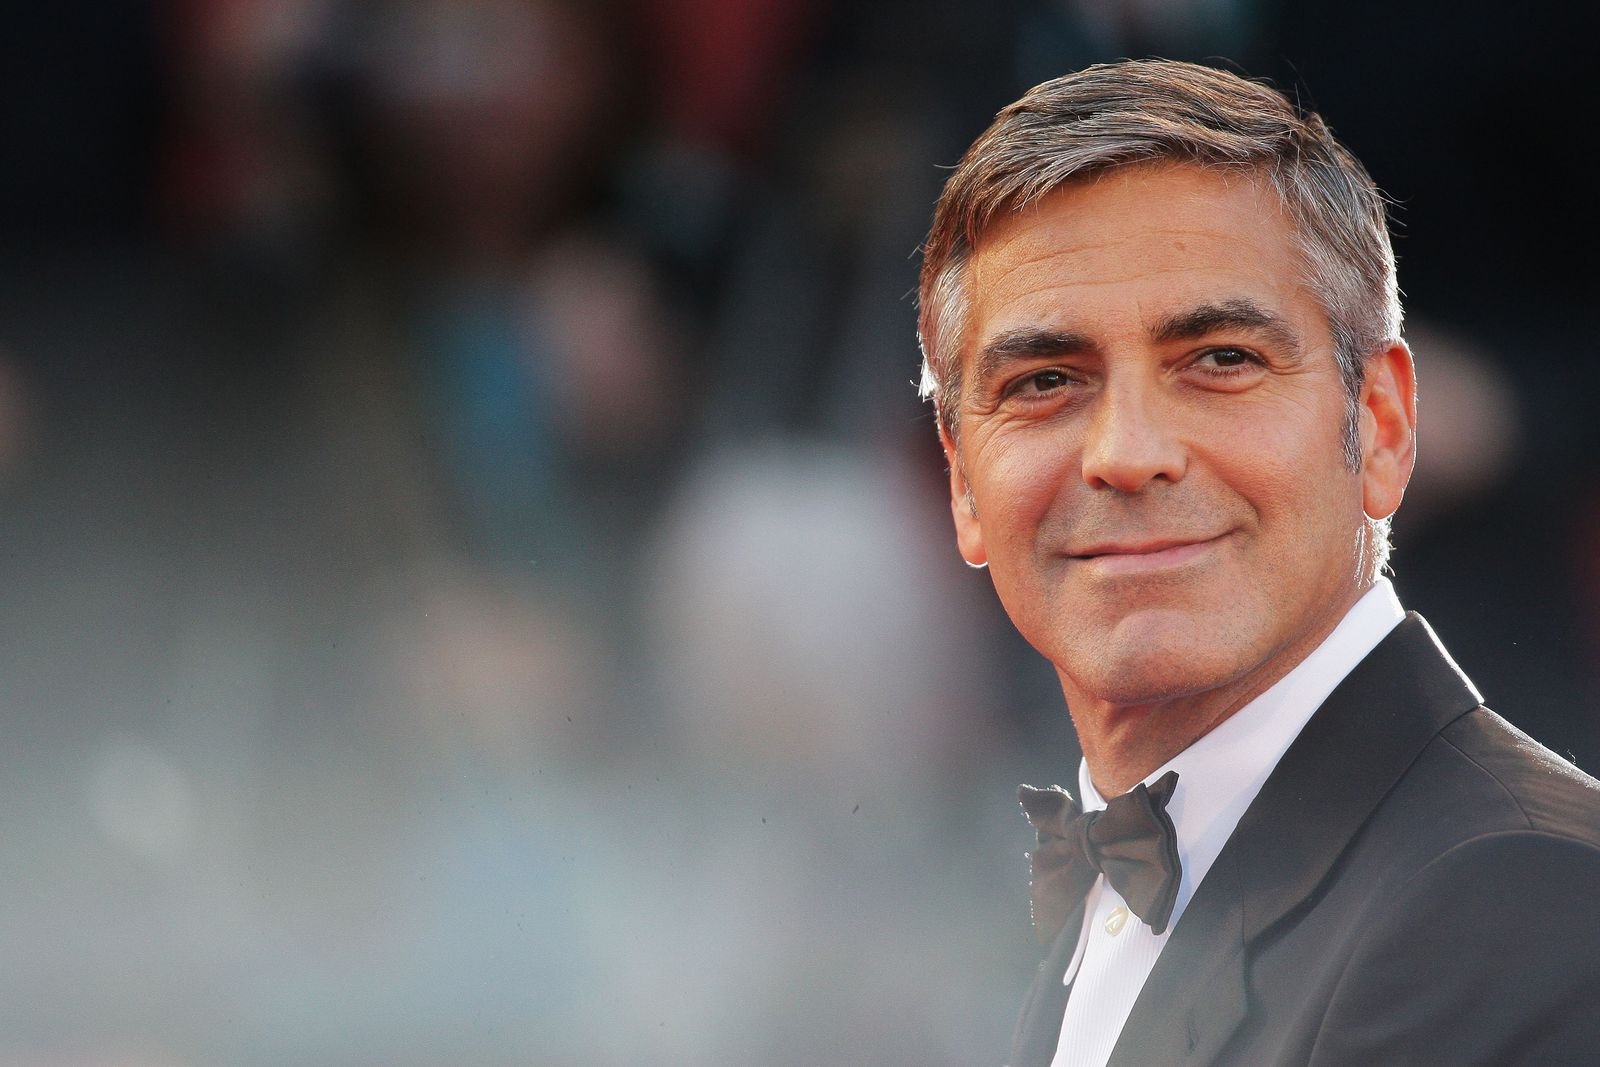 George Clooney at "The Men Who Stare At Goats" premiere during the 66th Venice Film Festival on September 8, 2009, in Venice, Italy | Photo: Gareth Cattermole/Getty Images